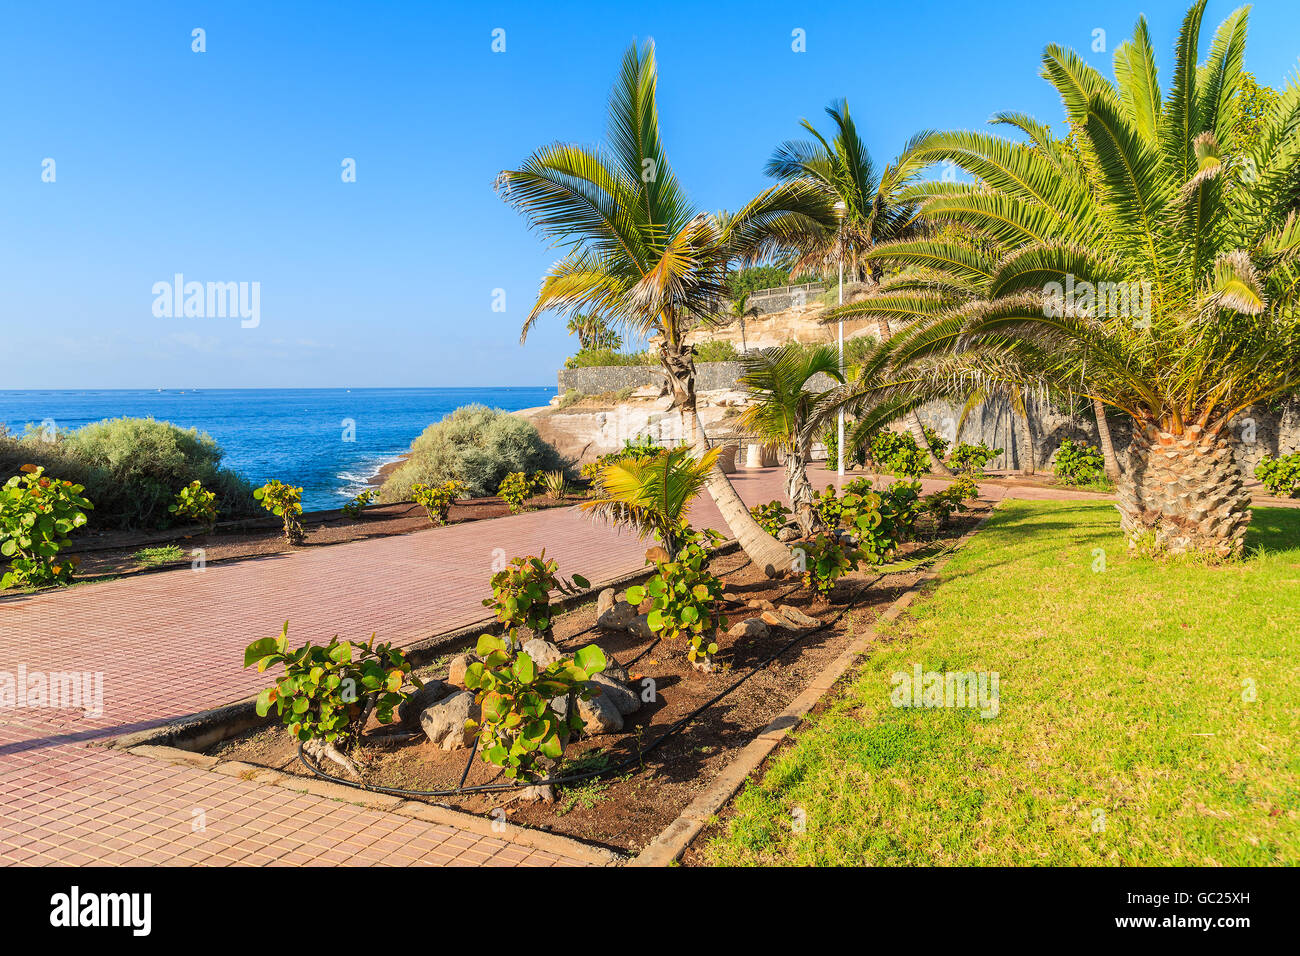 Tropical palm trees on promenade in coastal town of Costa Adeje, Tenerife, Canary Islands, Spain Stock Photo